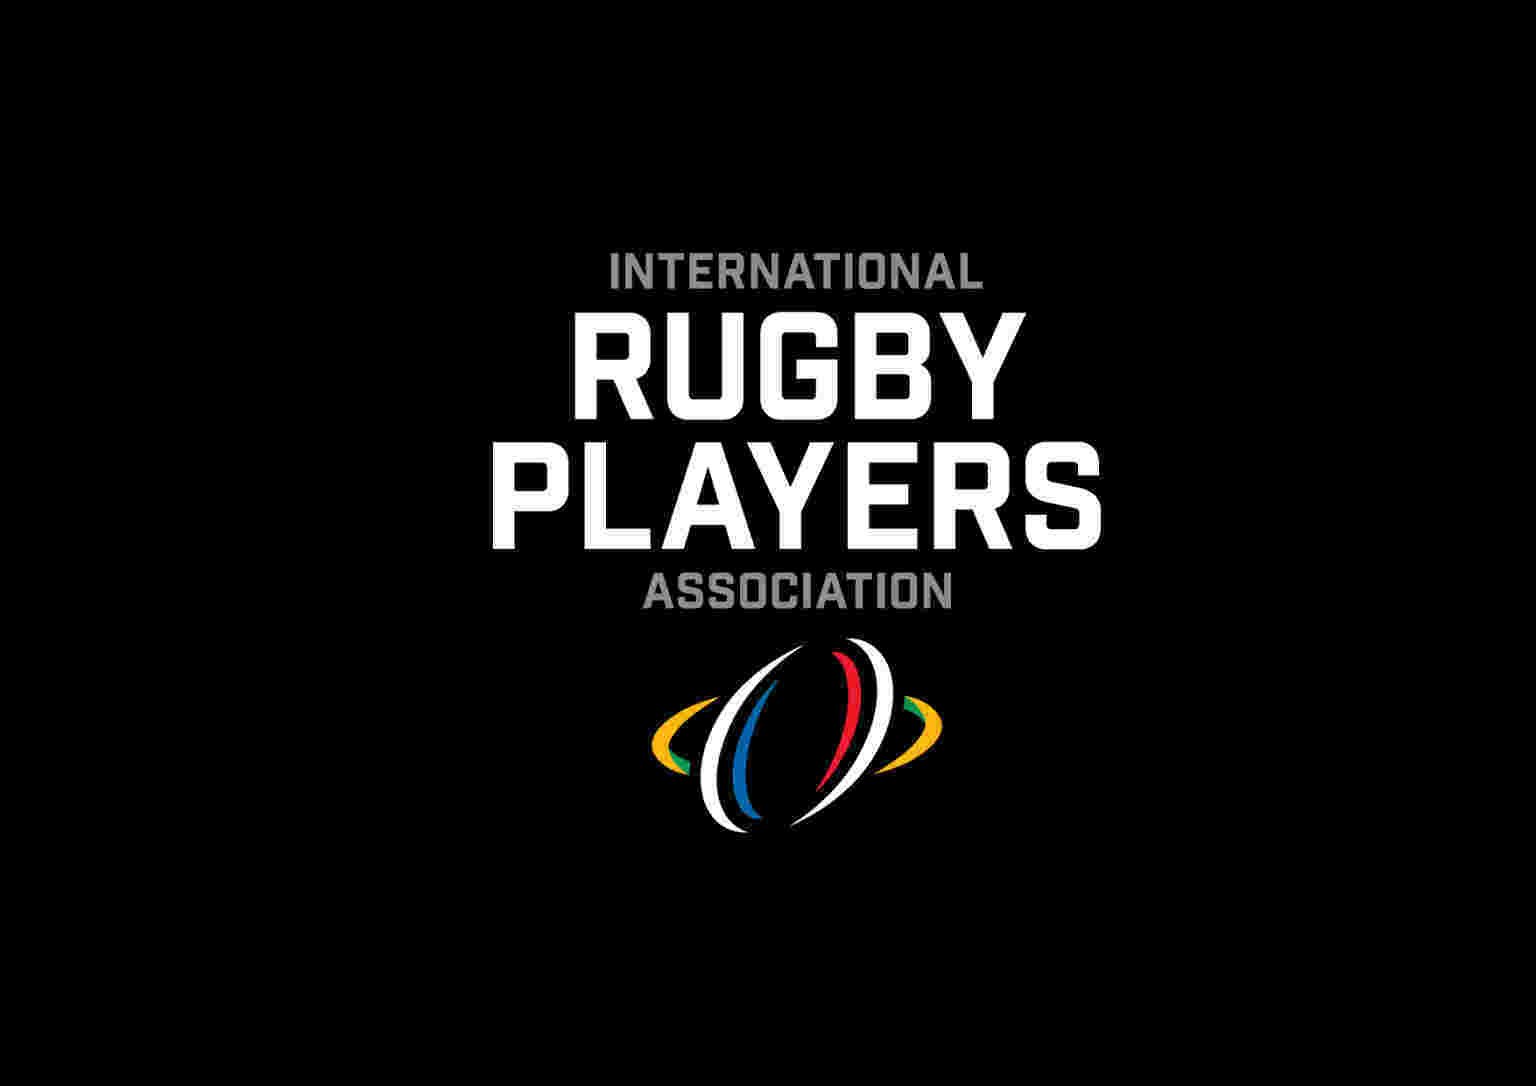 McCaw and Sexton spearhead deal with world rugby for international rugby players association